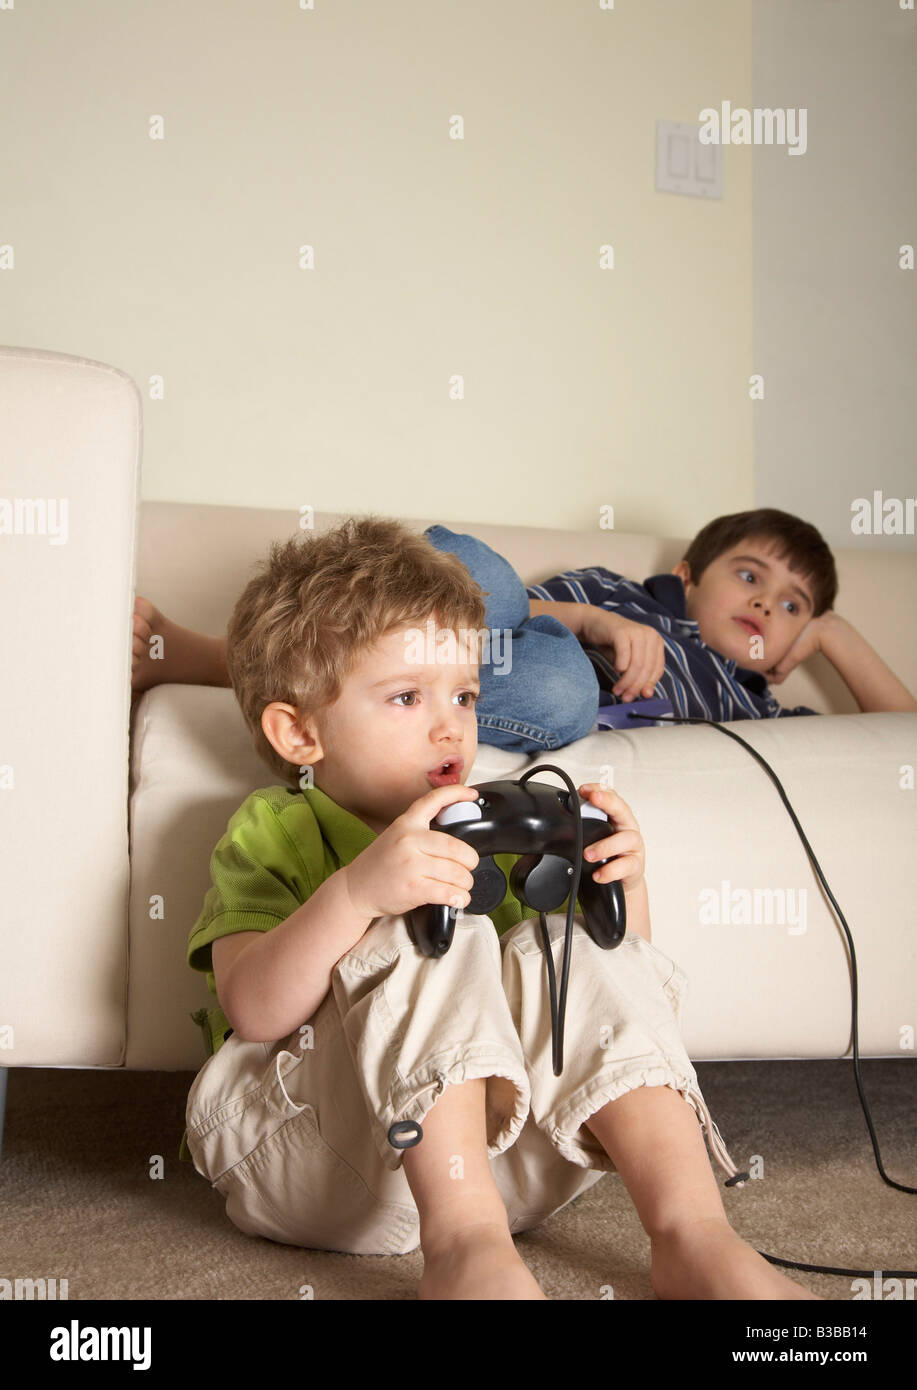 Boys Playing Video Games Stock Photo